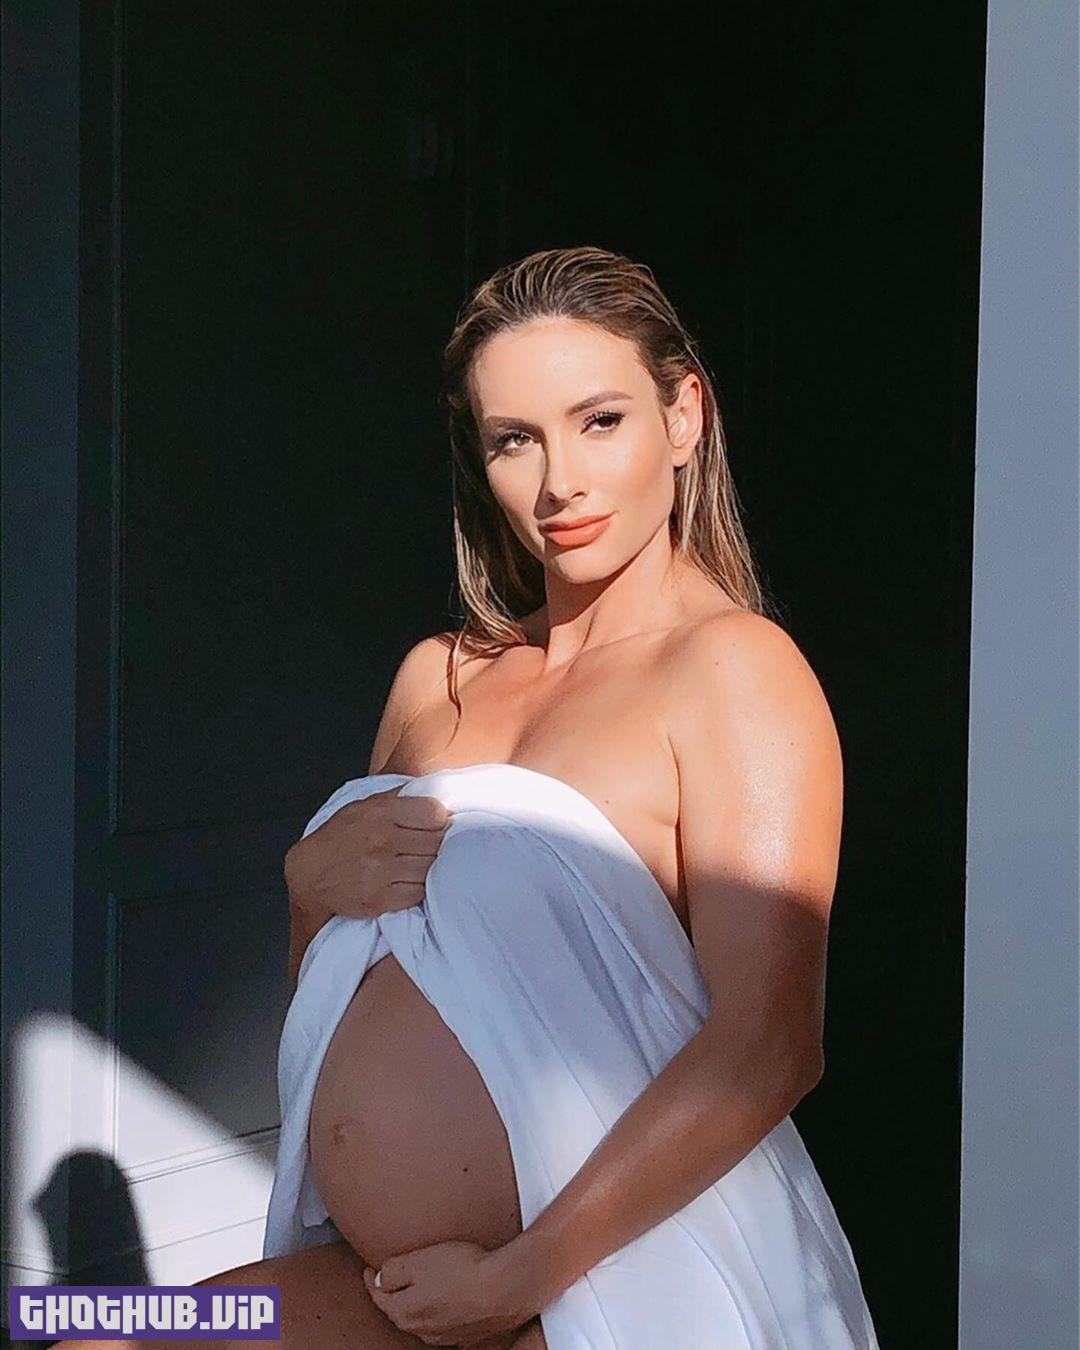 1691052732 152 Paige Hathaway Nude Photos During Her Pregnancy